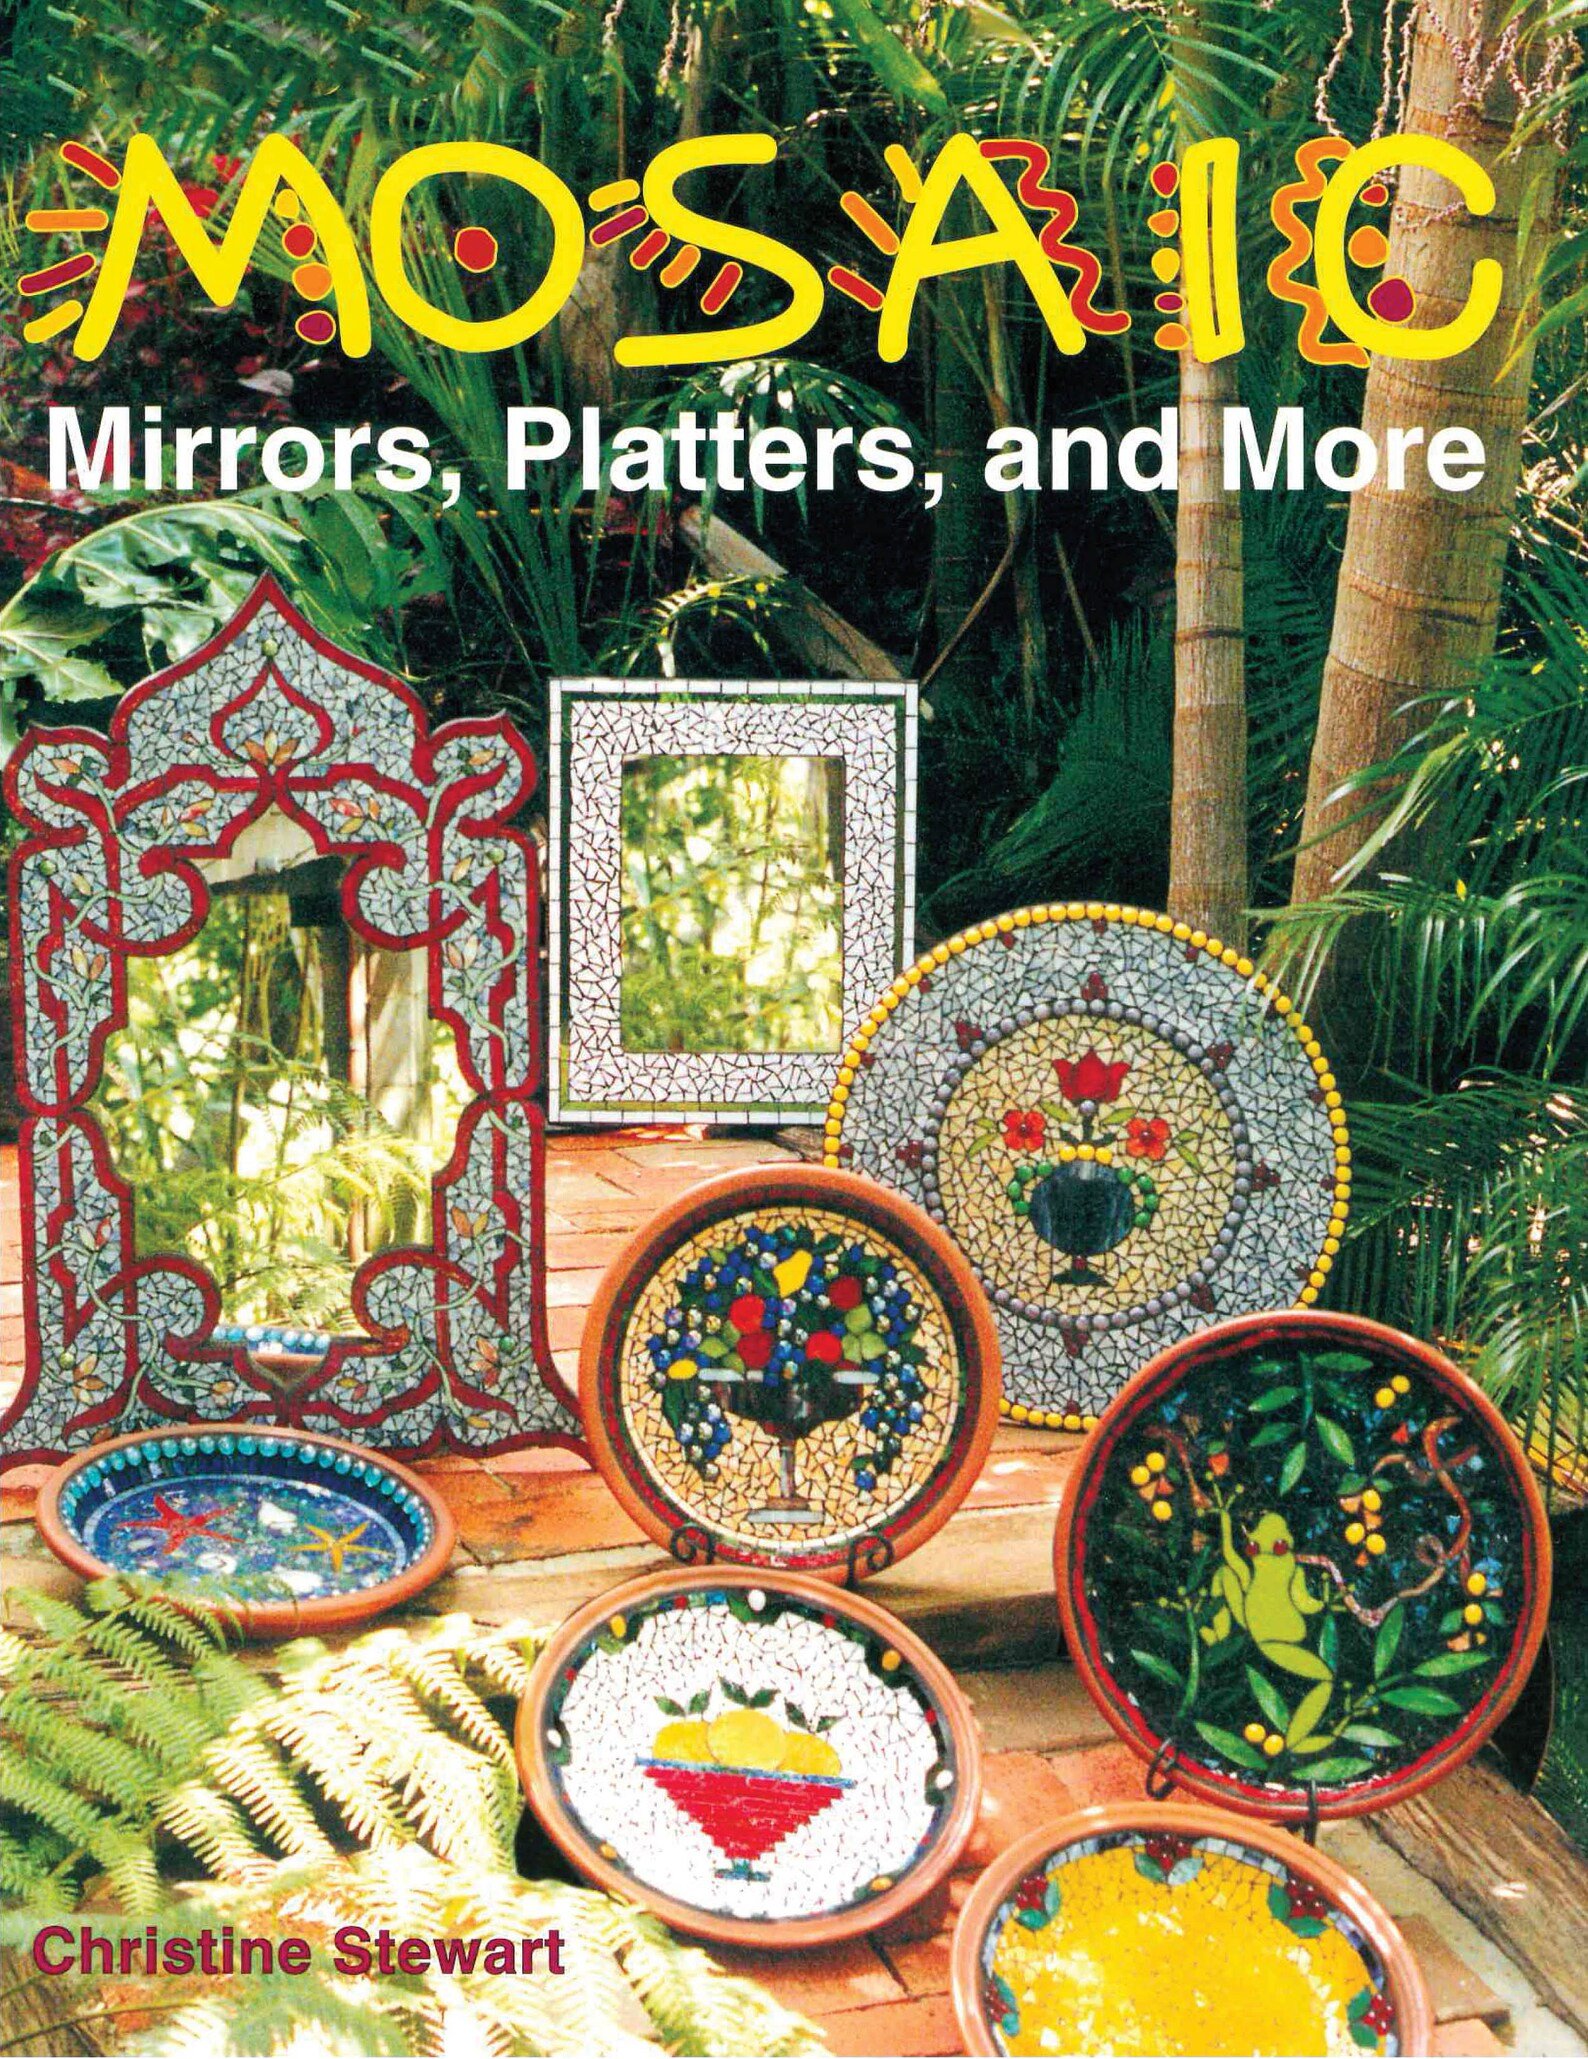  Purchase Mosaic Mirrors Platters and More. A instructional pattern book by Christine Stewart 